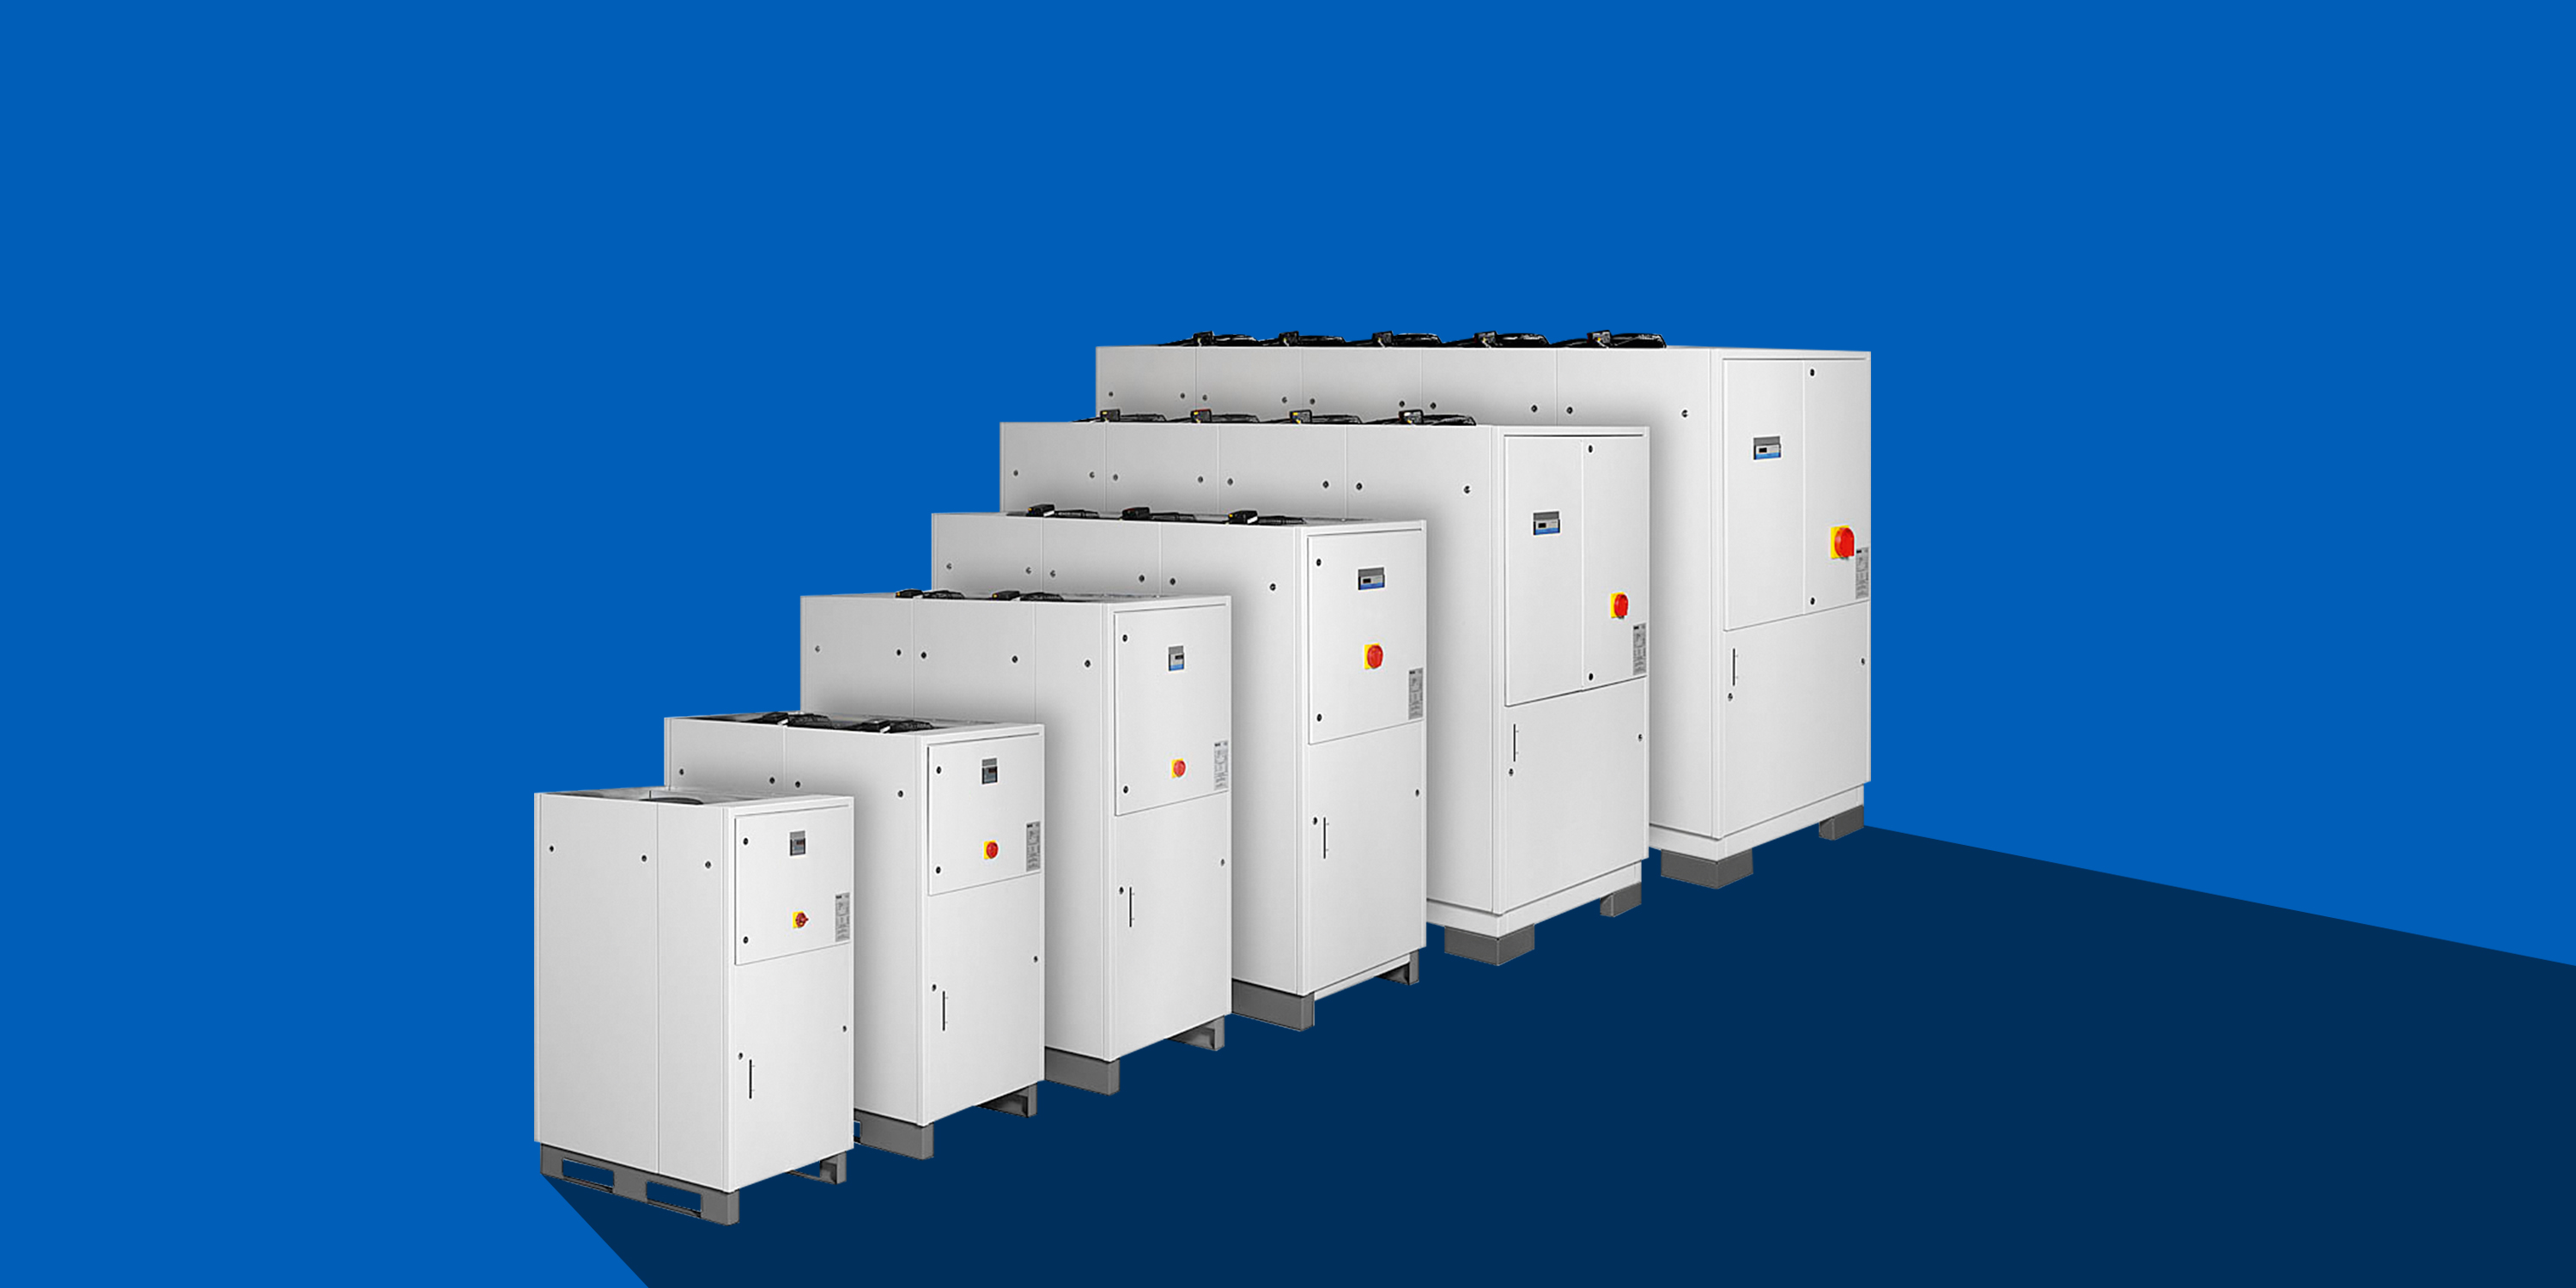 Platform-based standard models for precise, reliable cooling. All cooling block systems are compact, factory-assembled liquid cooling units suitable for a wide range of industrial applications. By using a wide variety of refrigerants, the chiller can be designed to meet specific needs.